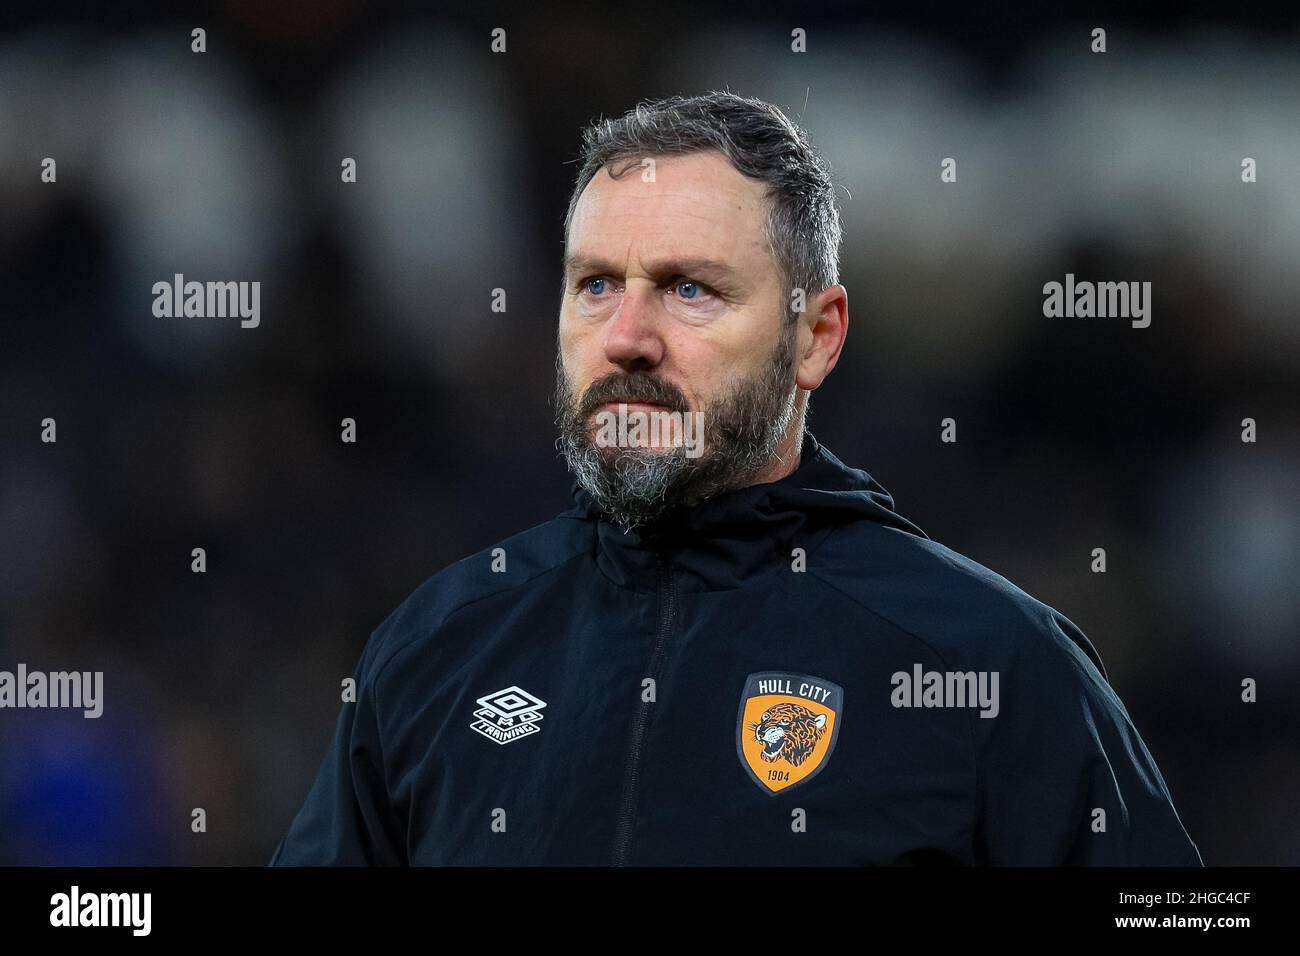 Hull City FC goalkeeping coach Barry Richardson ahead of the game Stock Photo